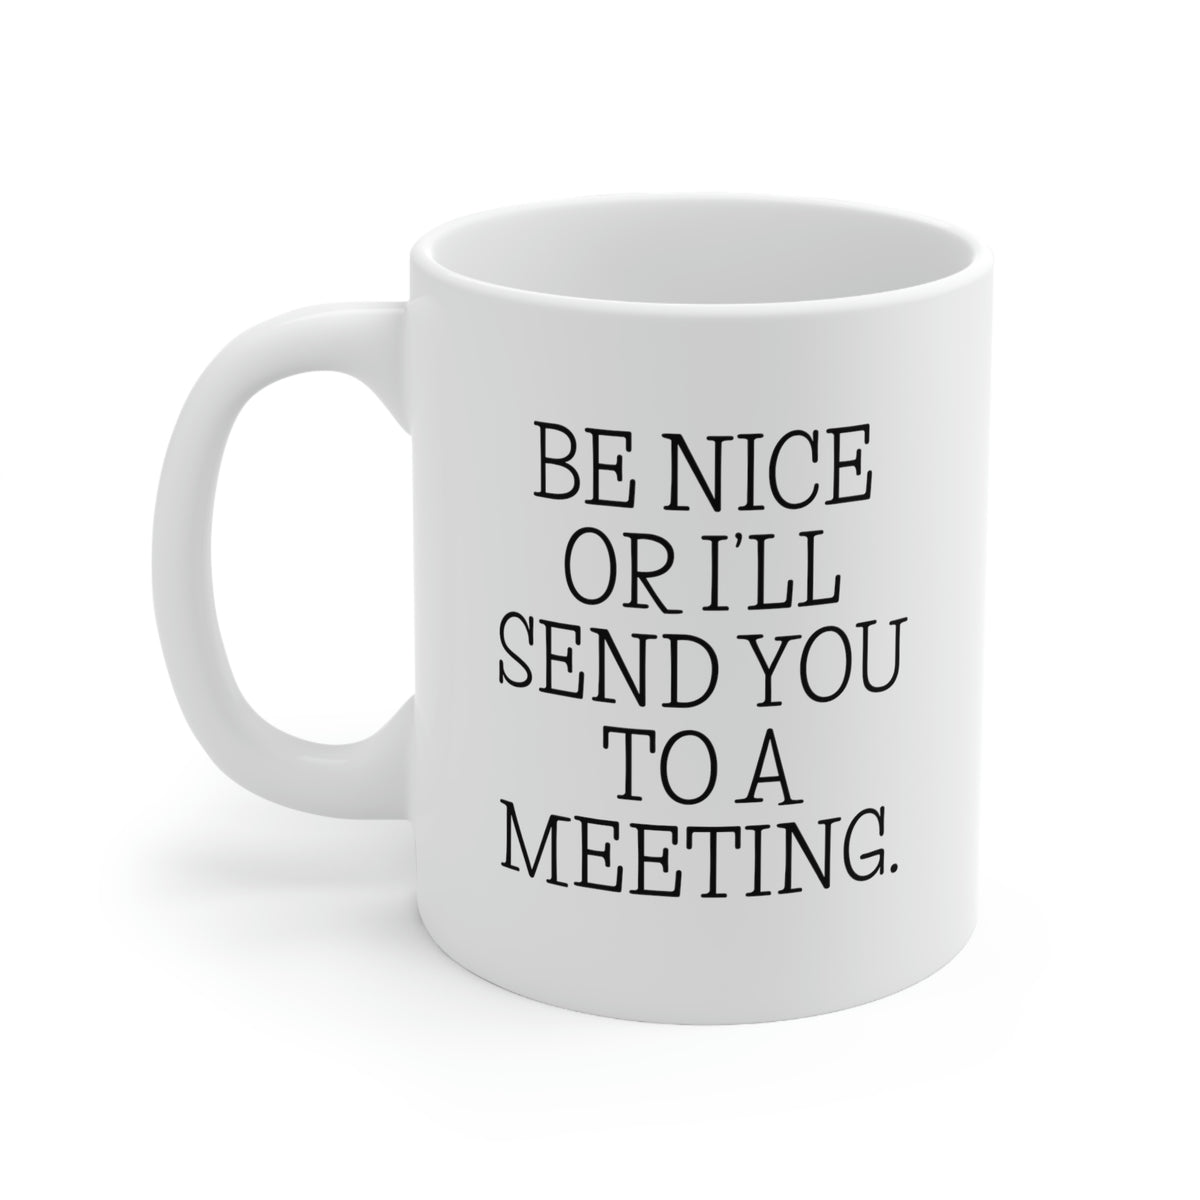 Administrative Assistant Gifts - Be Nice Or I'll Send You To A Meeting. - Admin Assistant Coffee Mug For Women Men